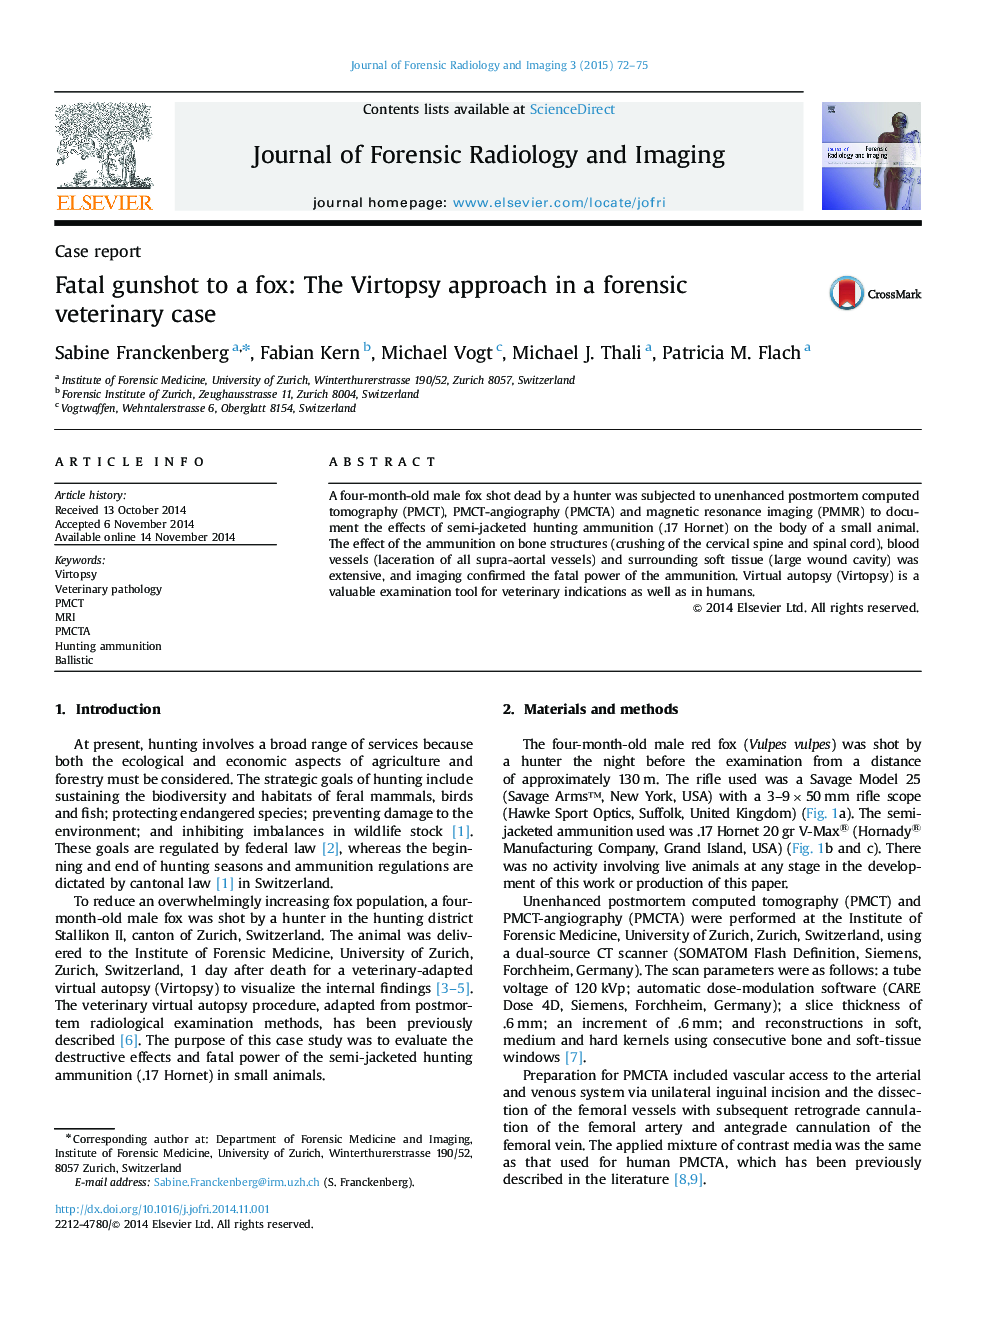 Fatal gunshot to a fox: The Virtopsy approach in a forensic veterinary case